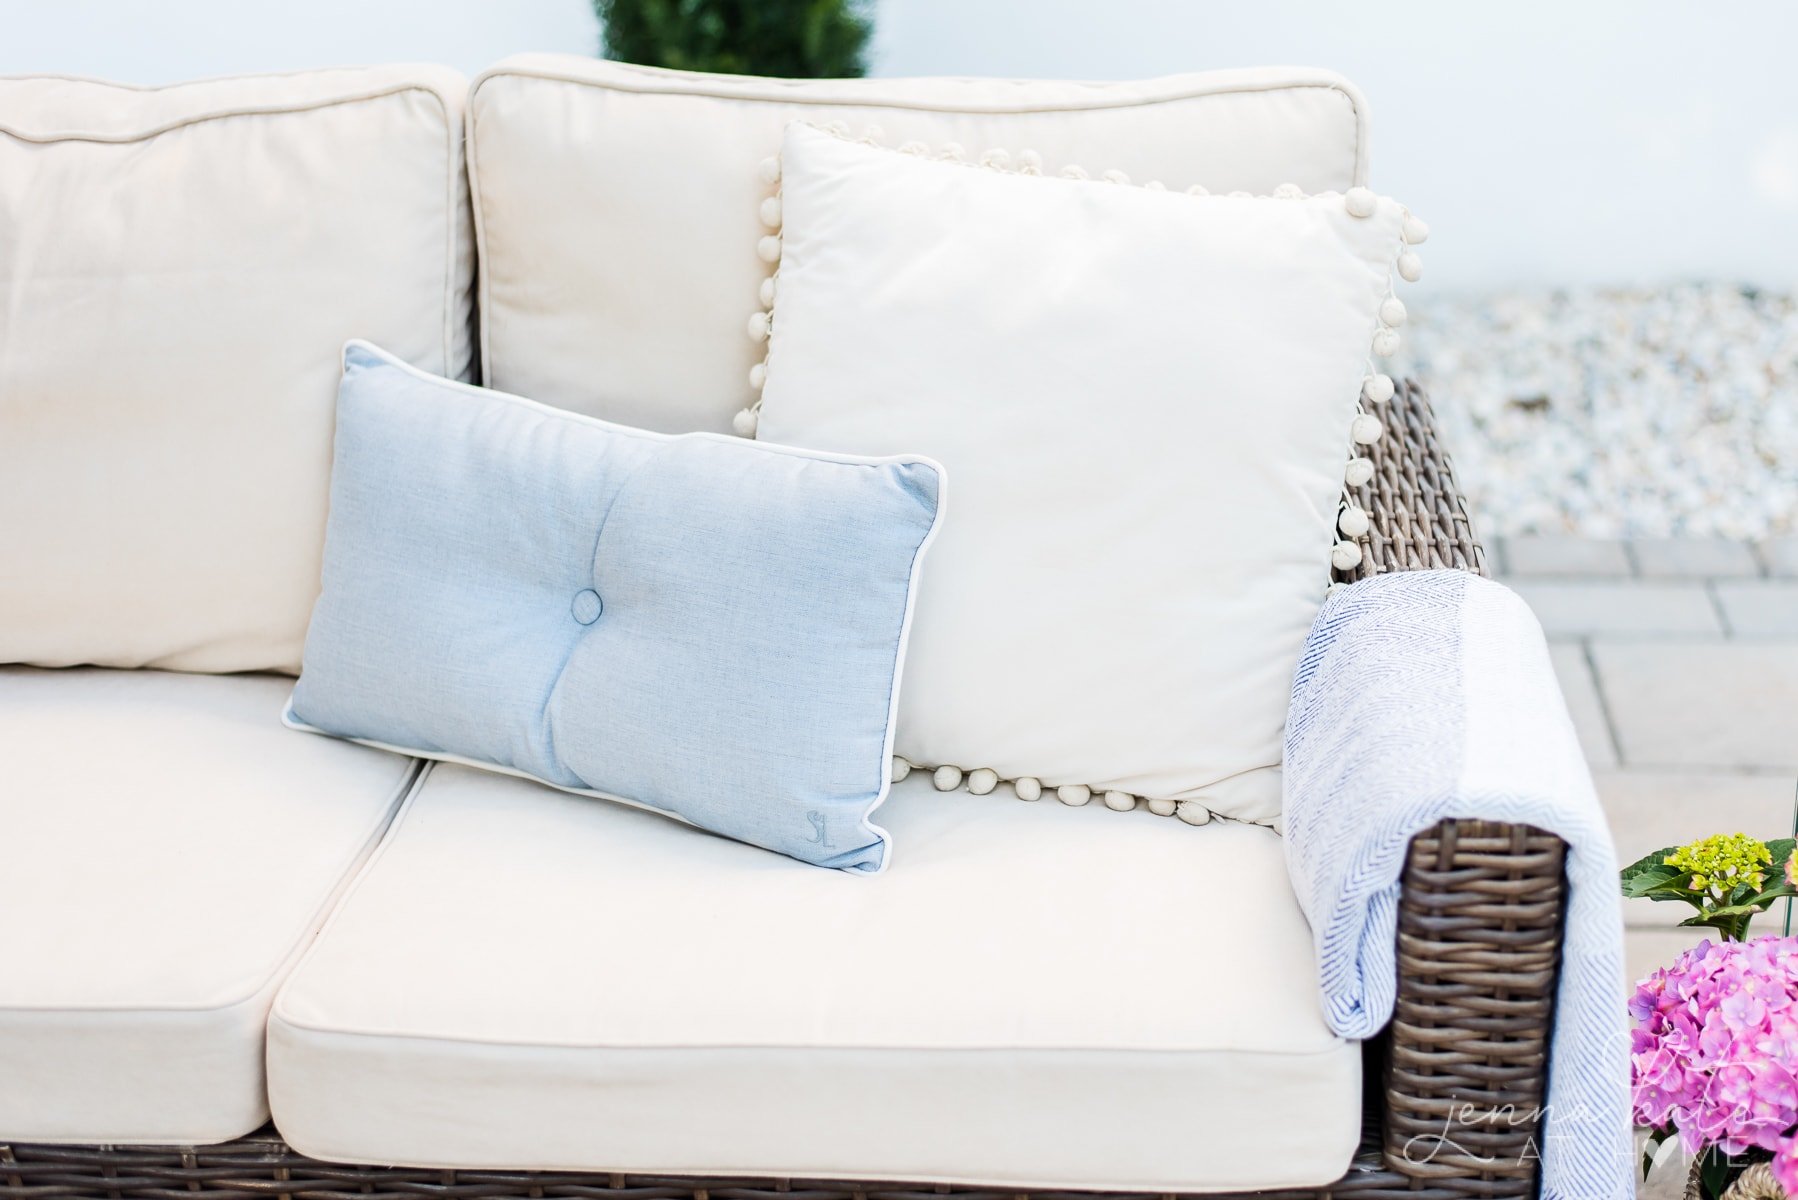 Clean patio cushions back on the fiurniture with a blue accent pillow